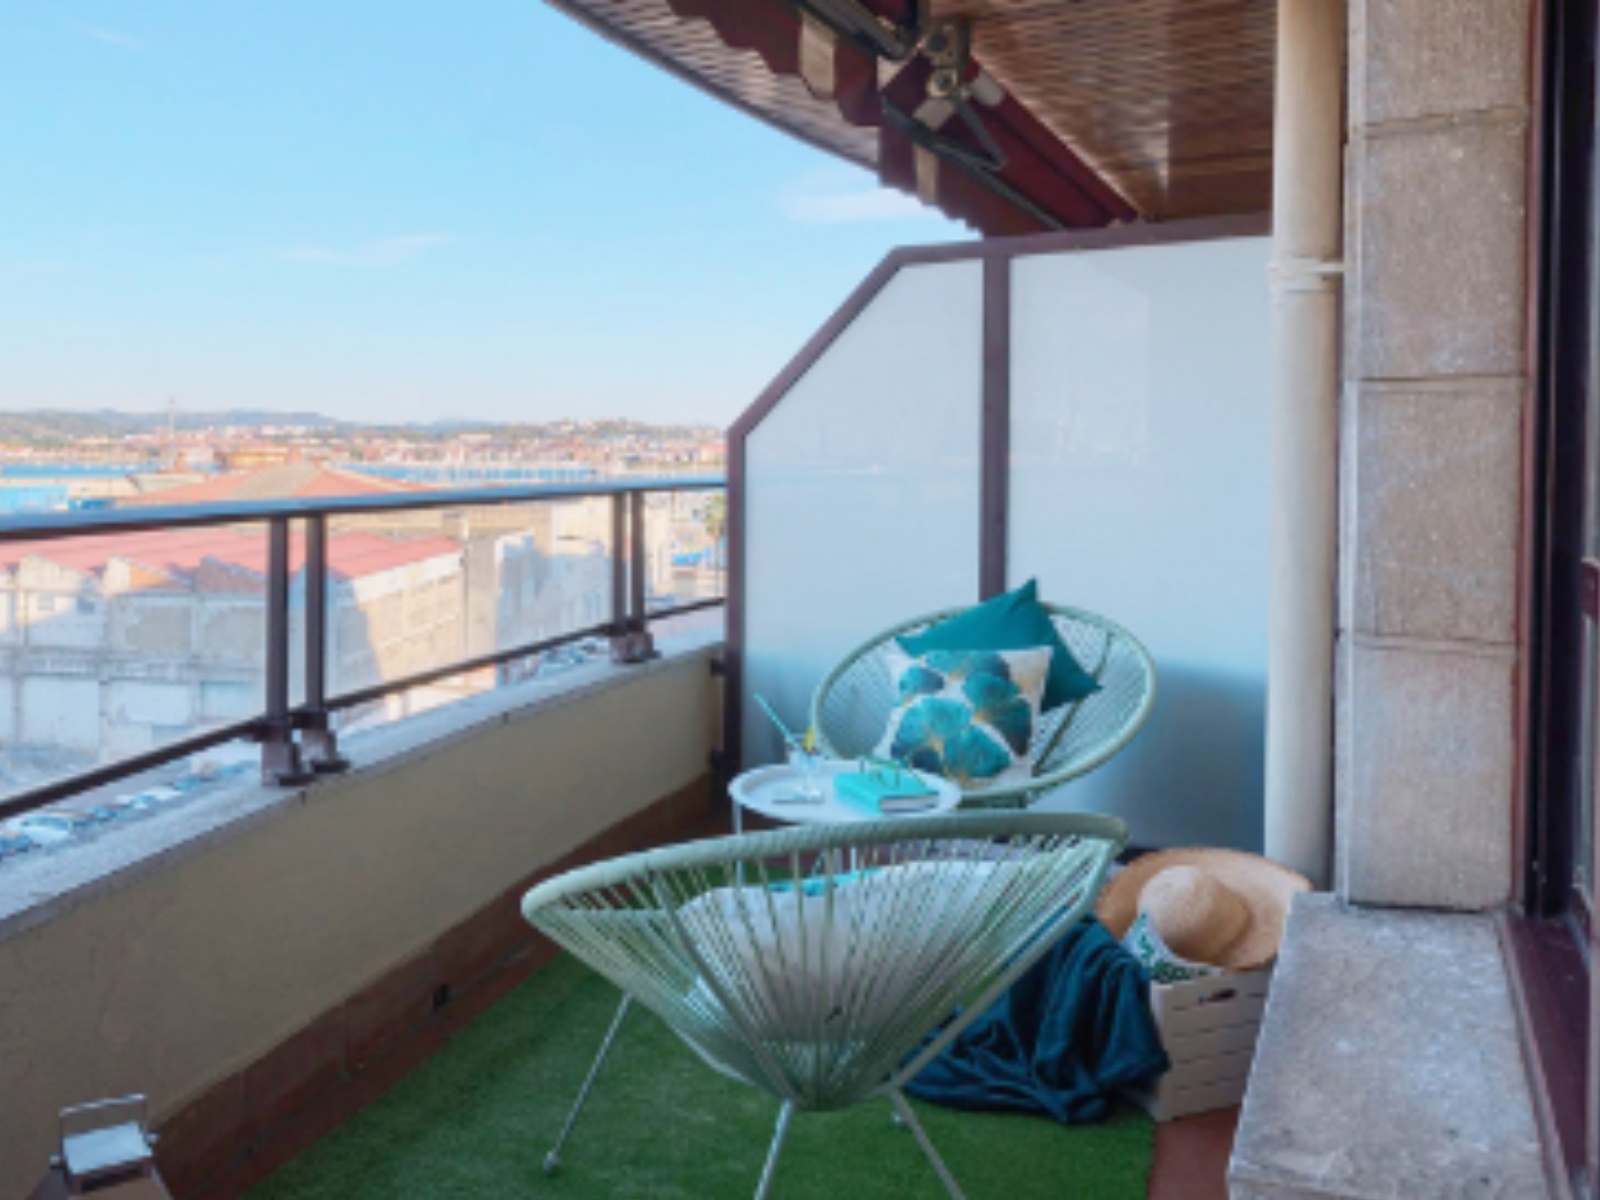 Home-staging-terraza-despues